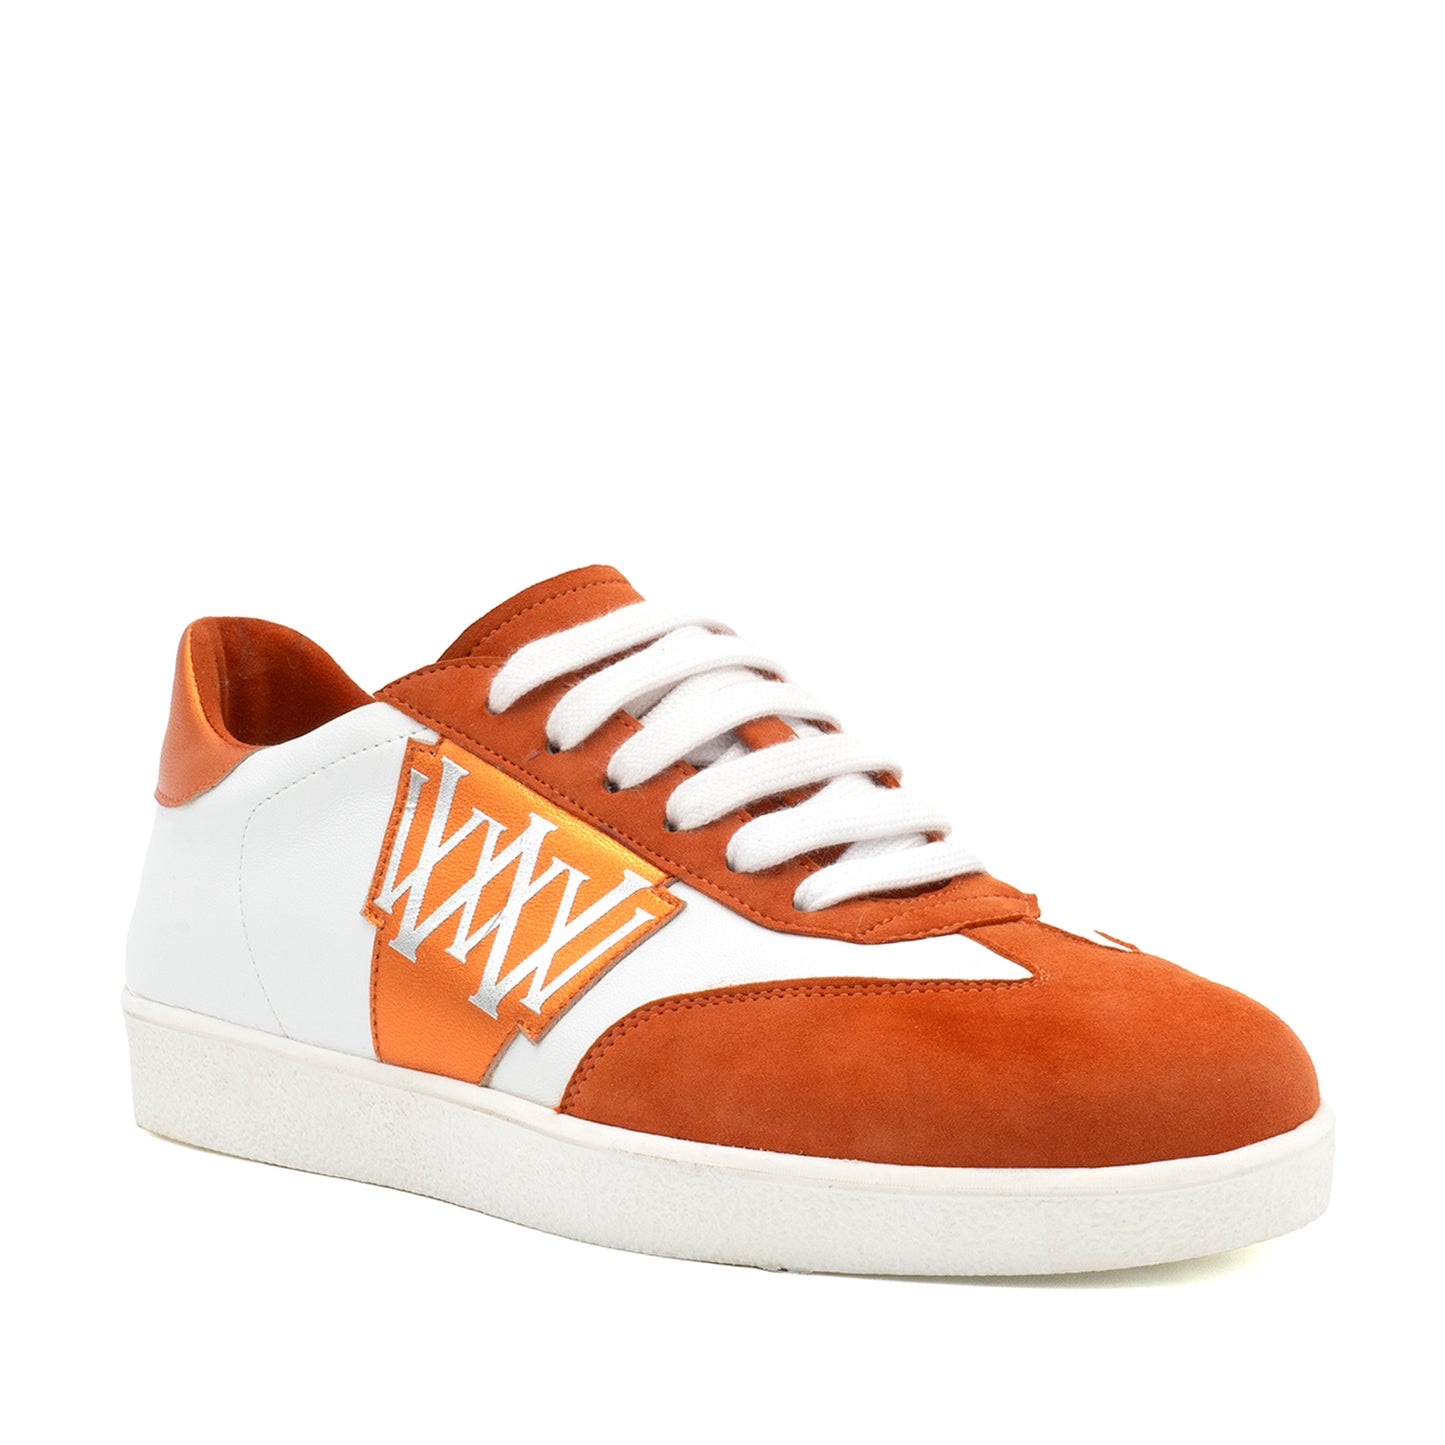 Valetta Lace Up White Parm/Flame